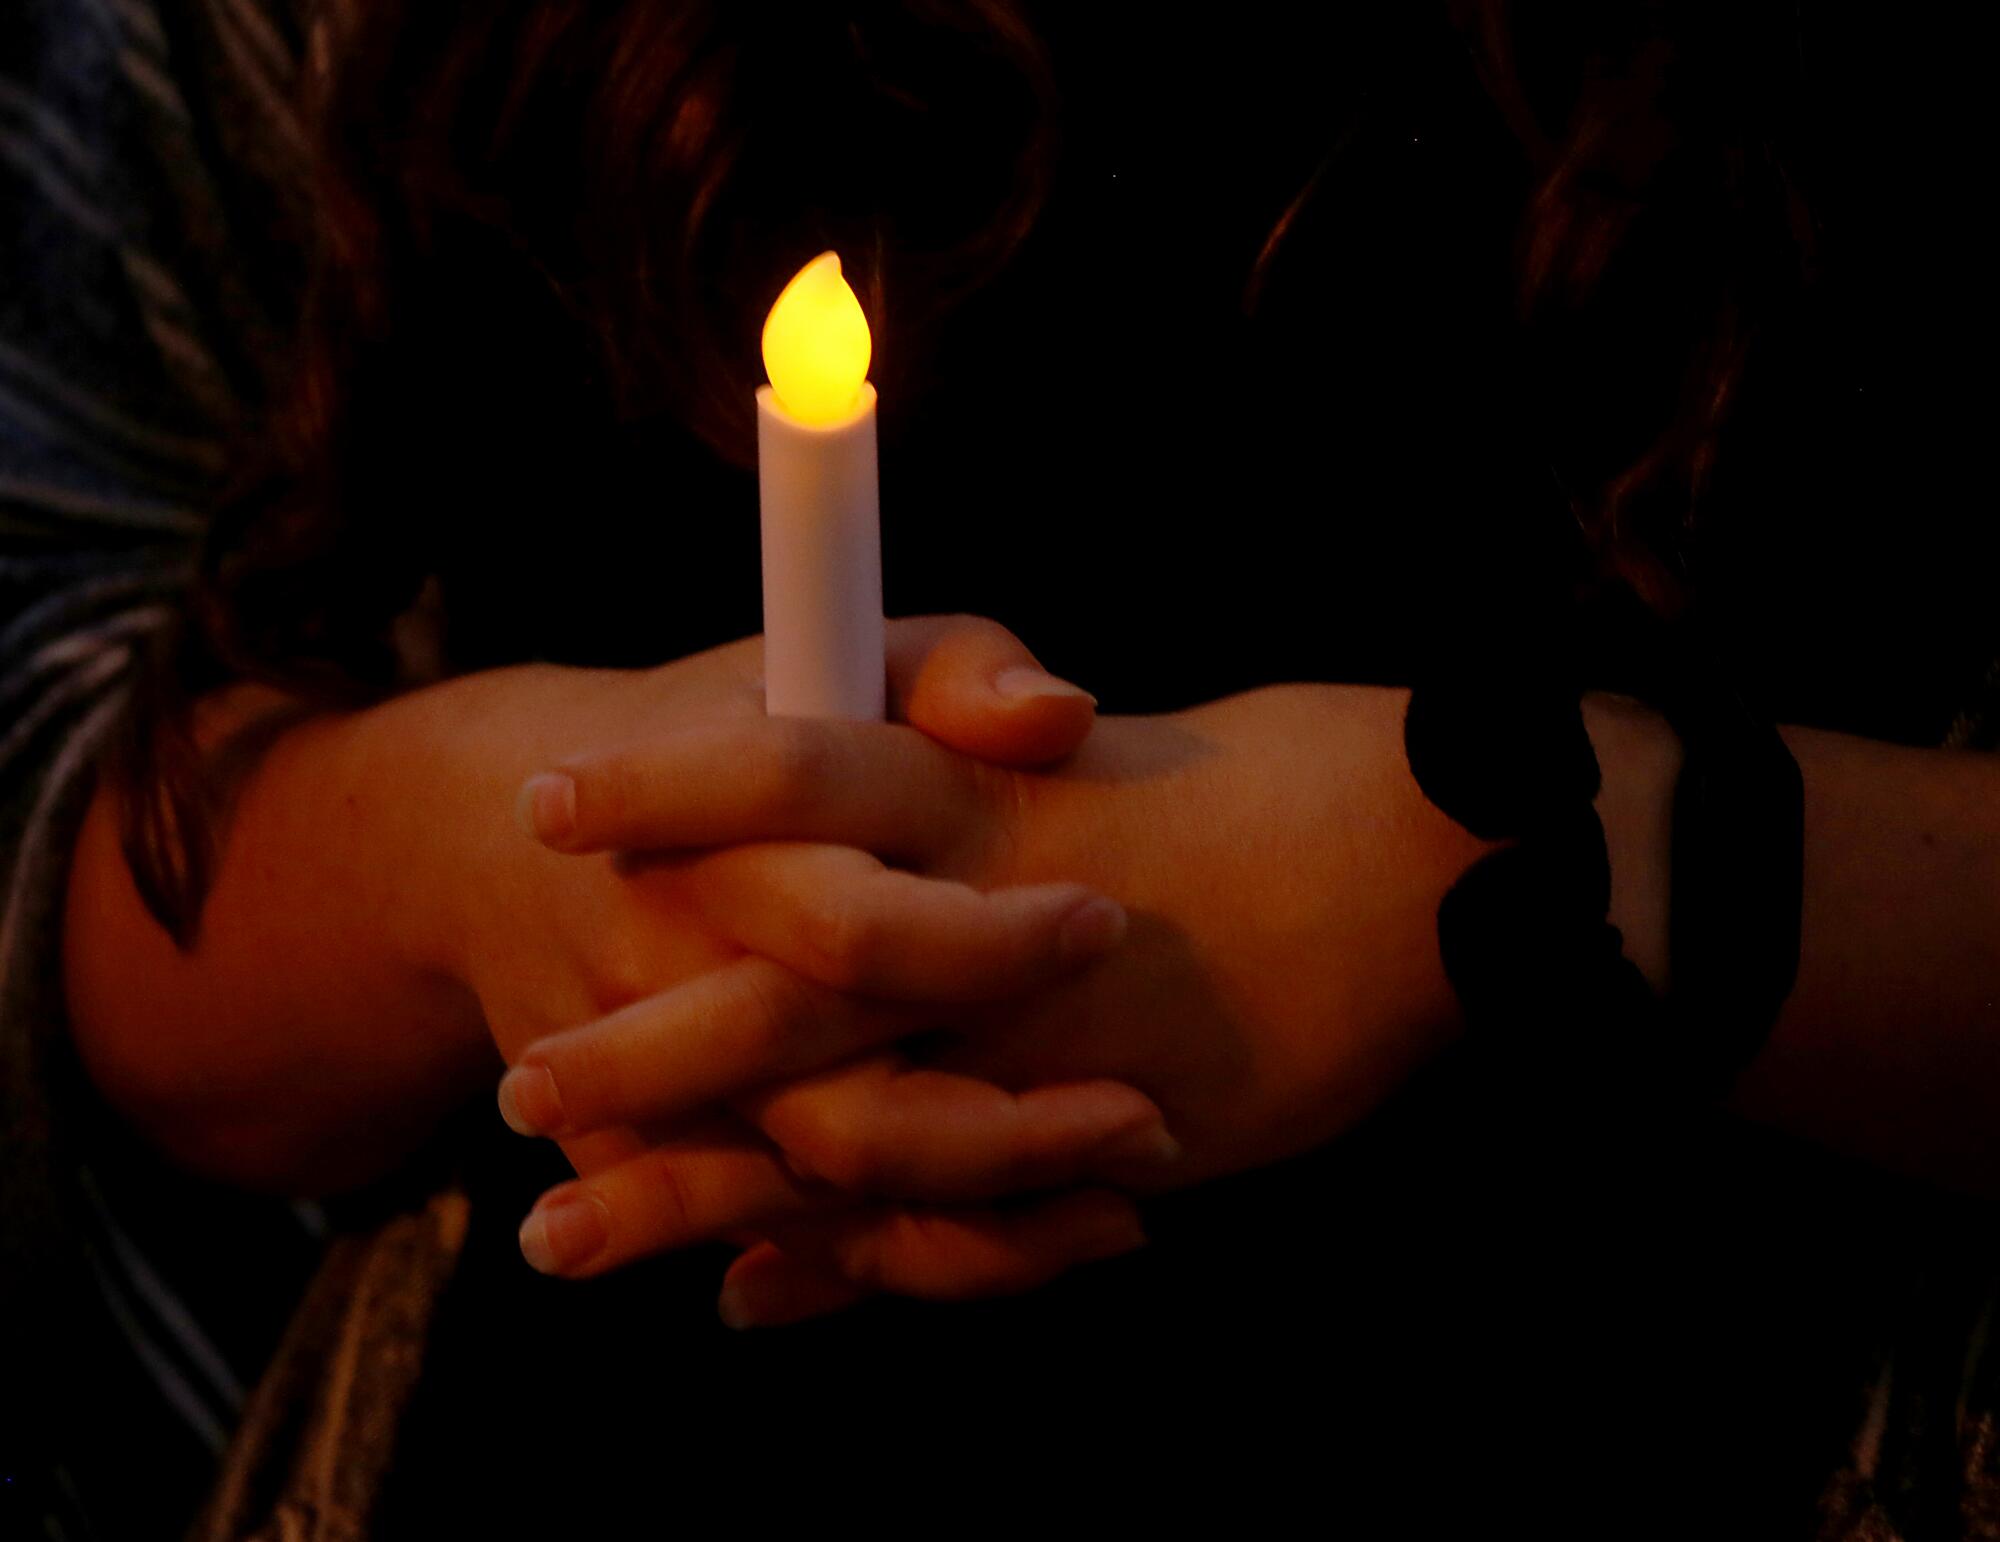 The hands of woman hold a candle.